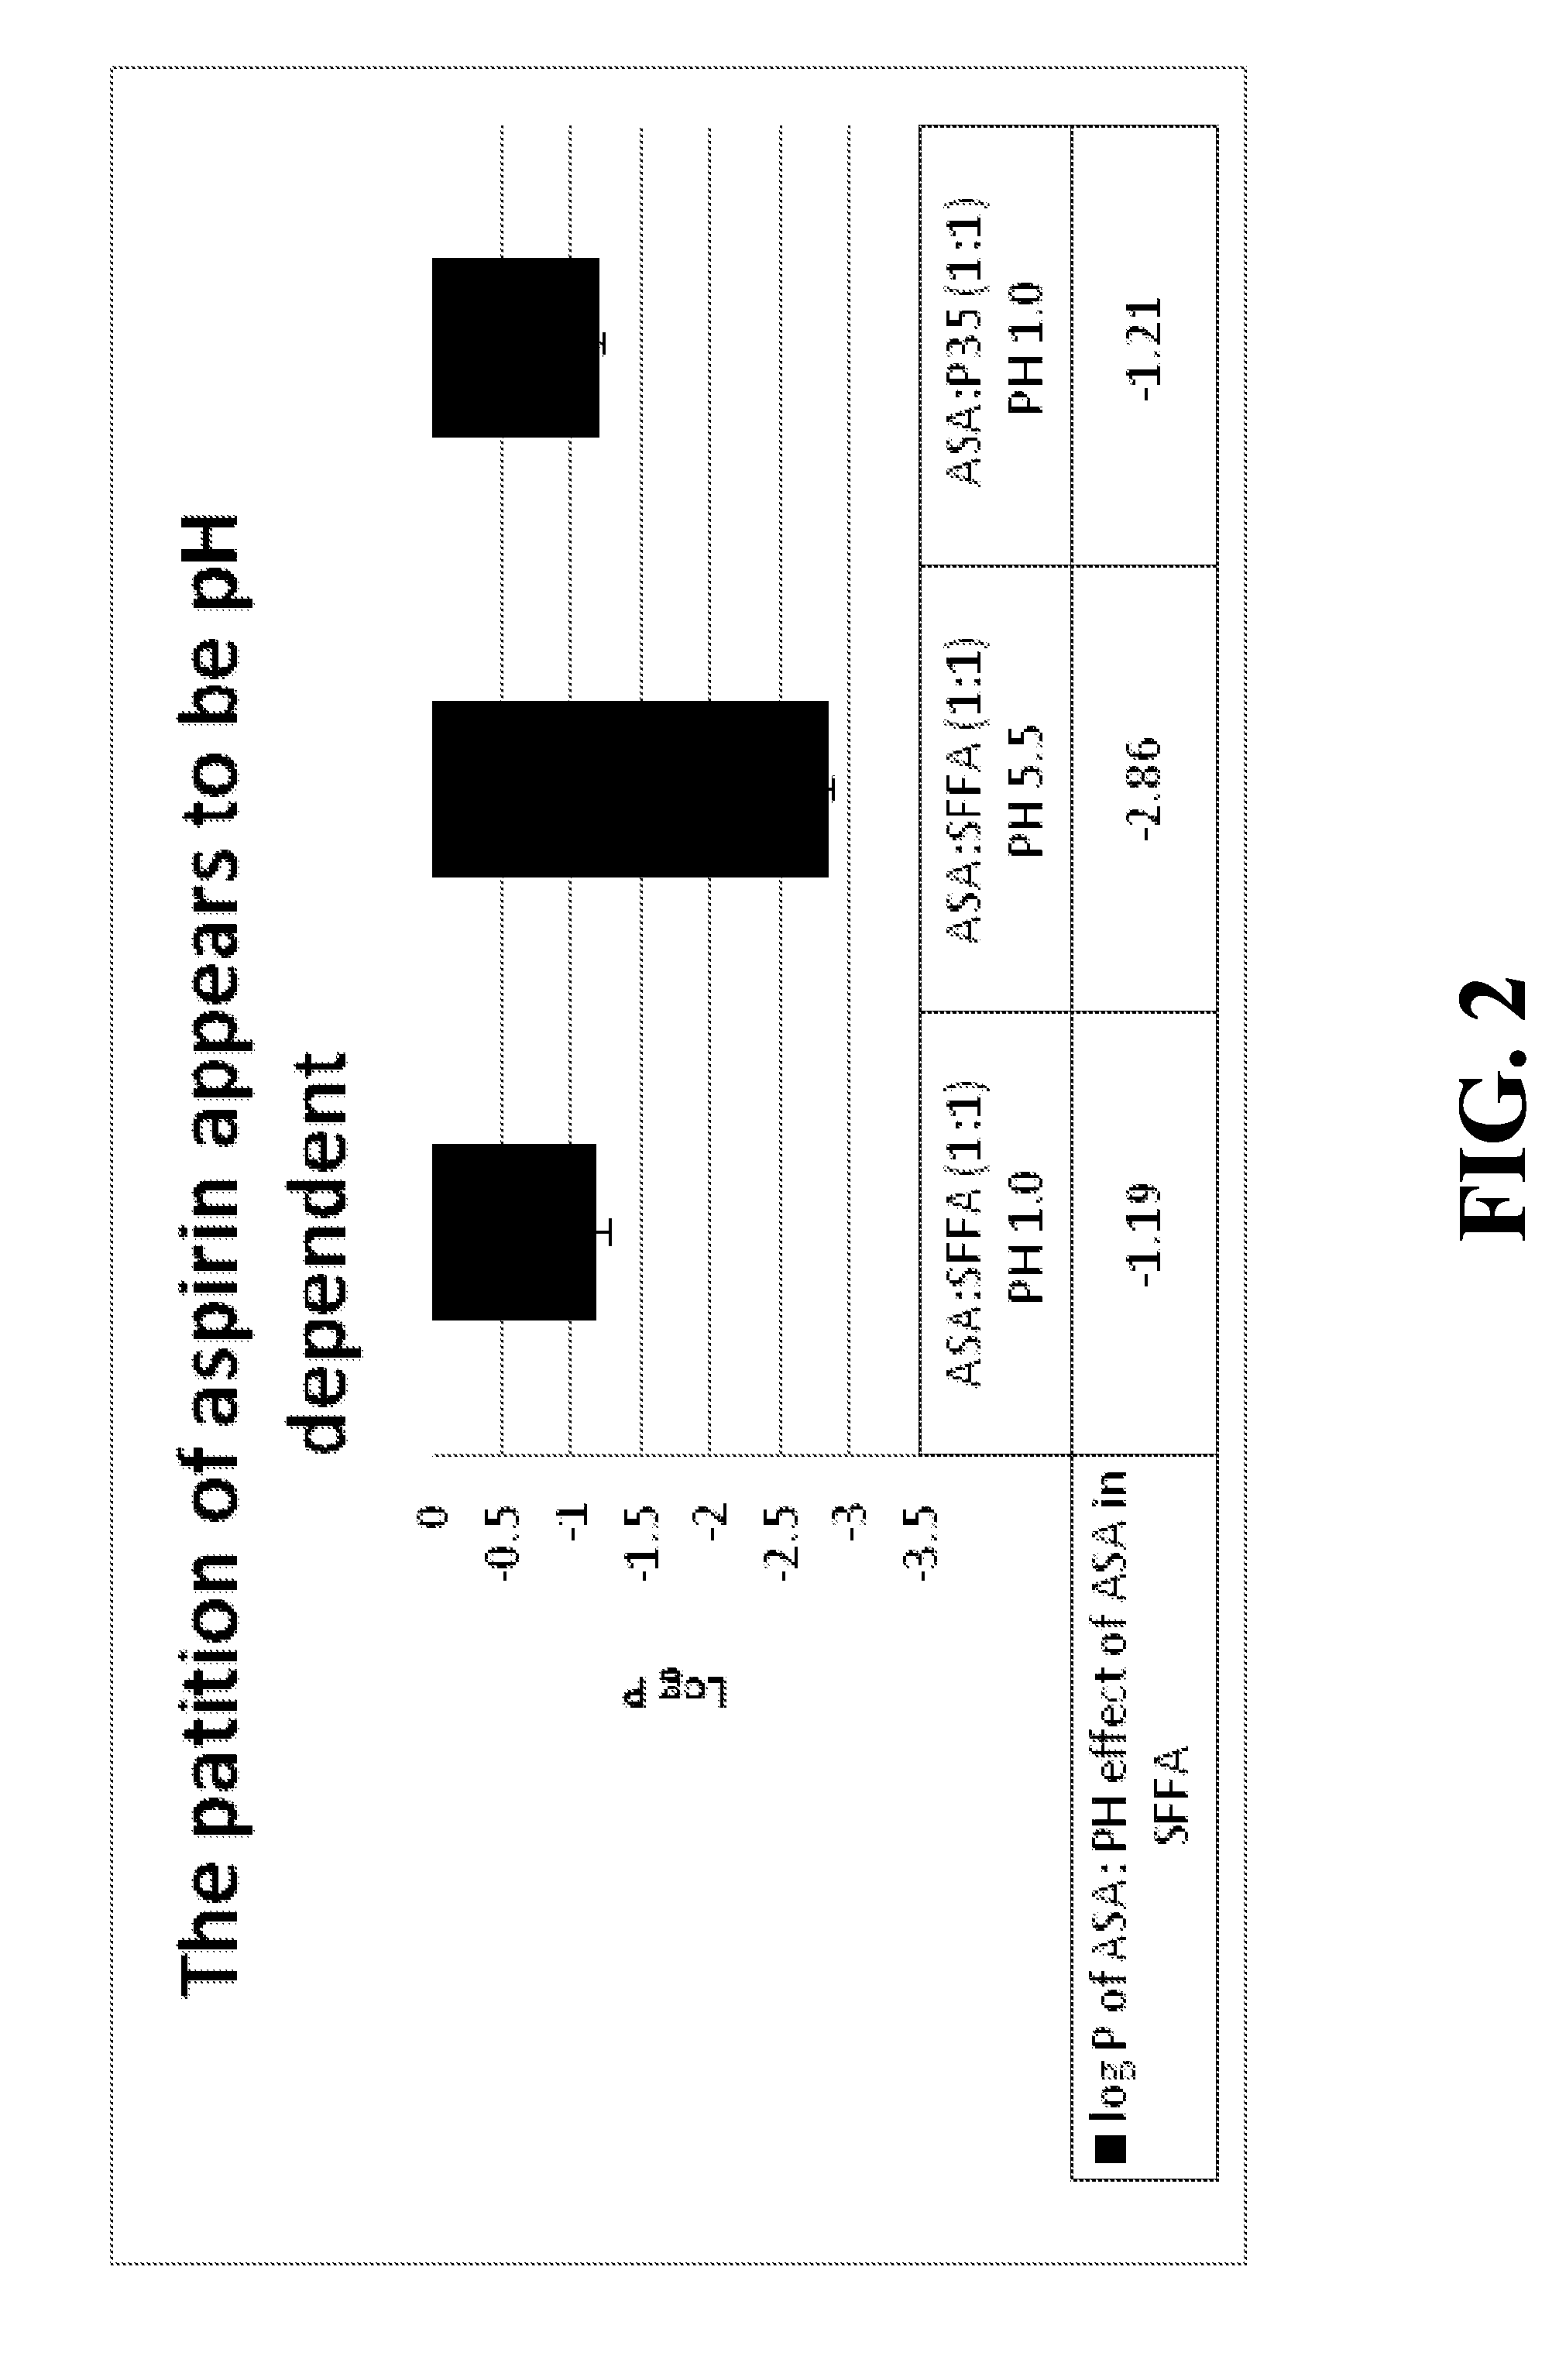 pH DEPENDENT CARRIERS FOR TARGETED RELEASE OF PHARMACEUTICALS ALONG THE GASTROINTESTINAL TRACT, COMPOSITIONS THEREFROM, AND MAKING AND USING SAME